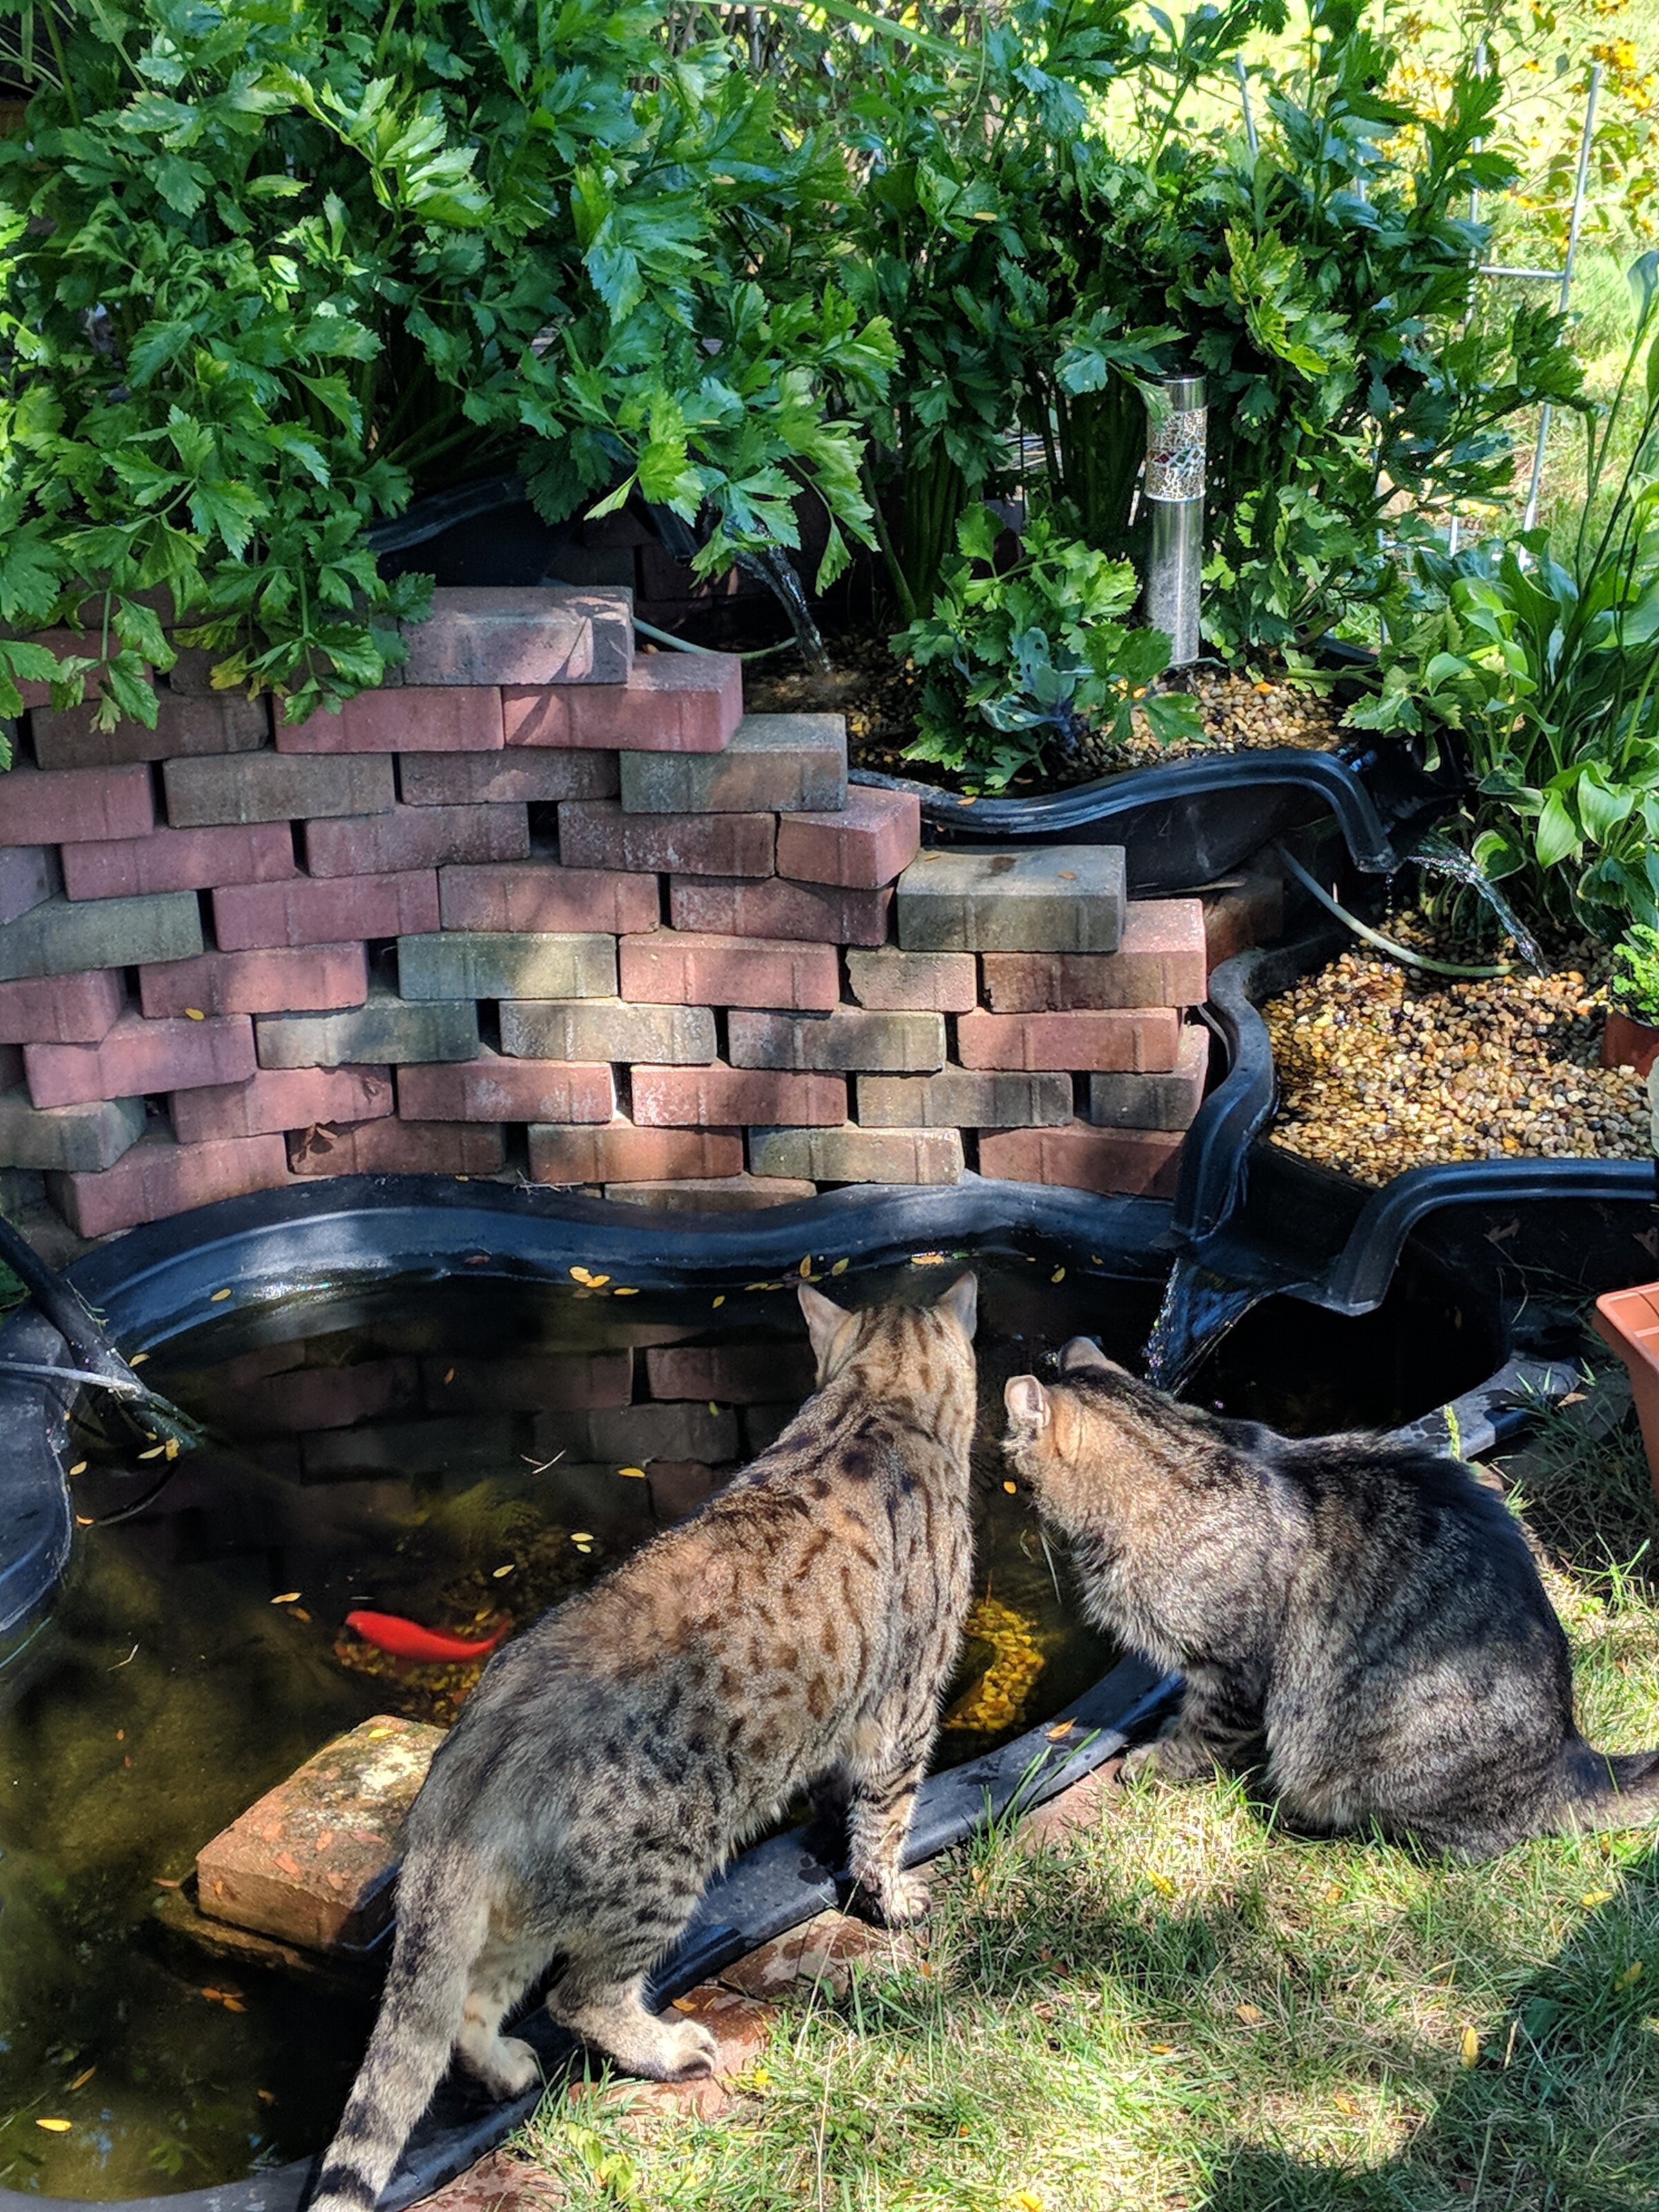 Has Become a Stelle Watering Hole for Neighborhood Cats and Flocks of Small Birds